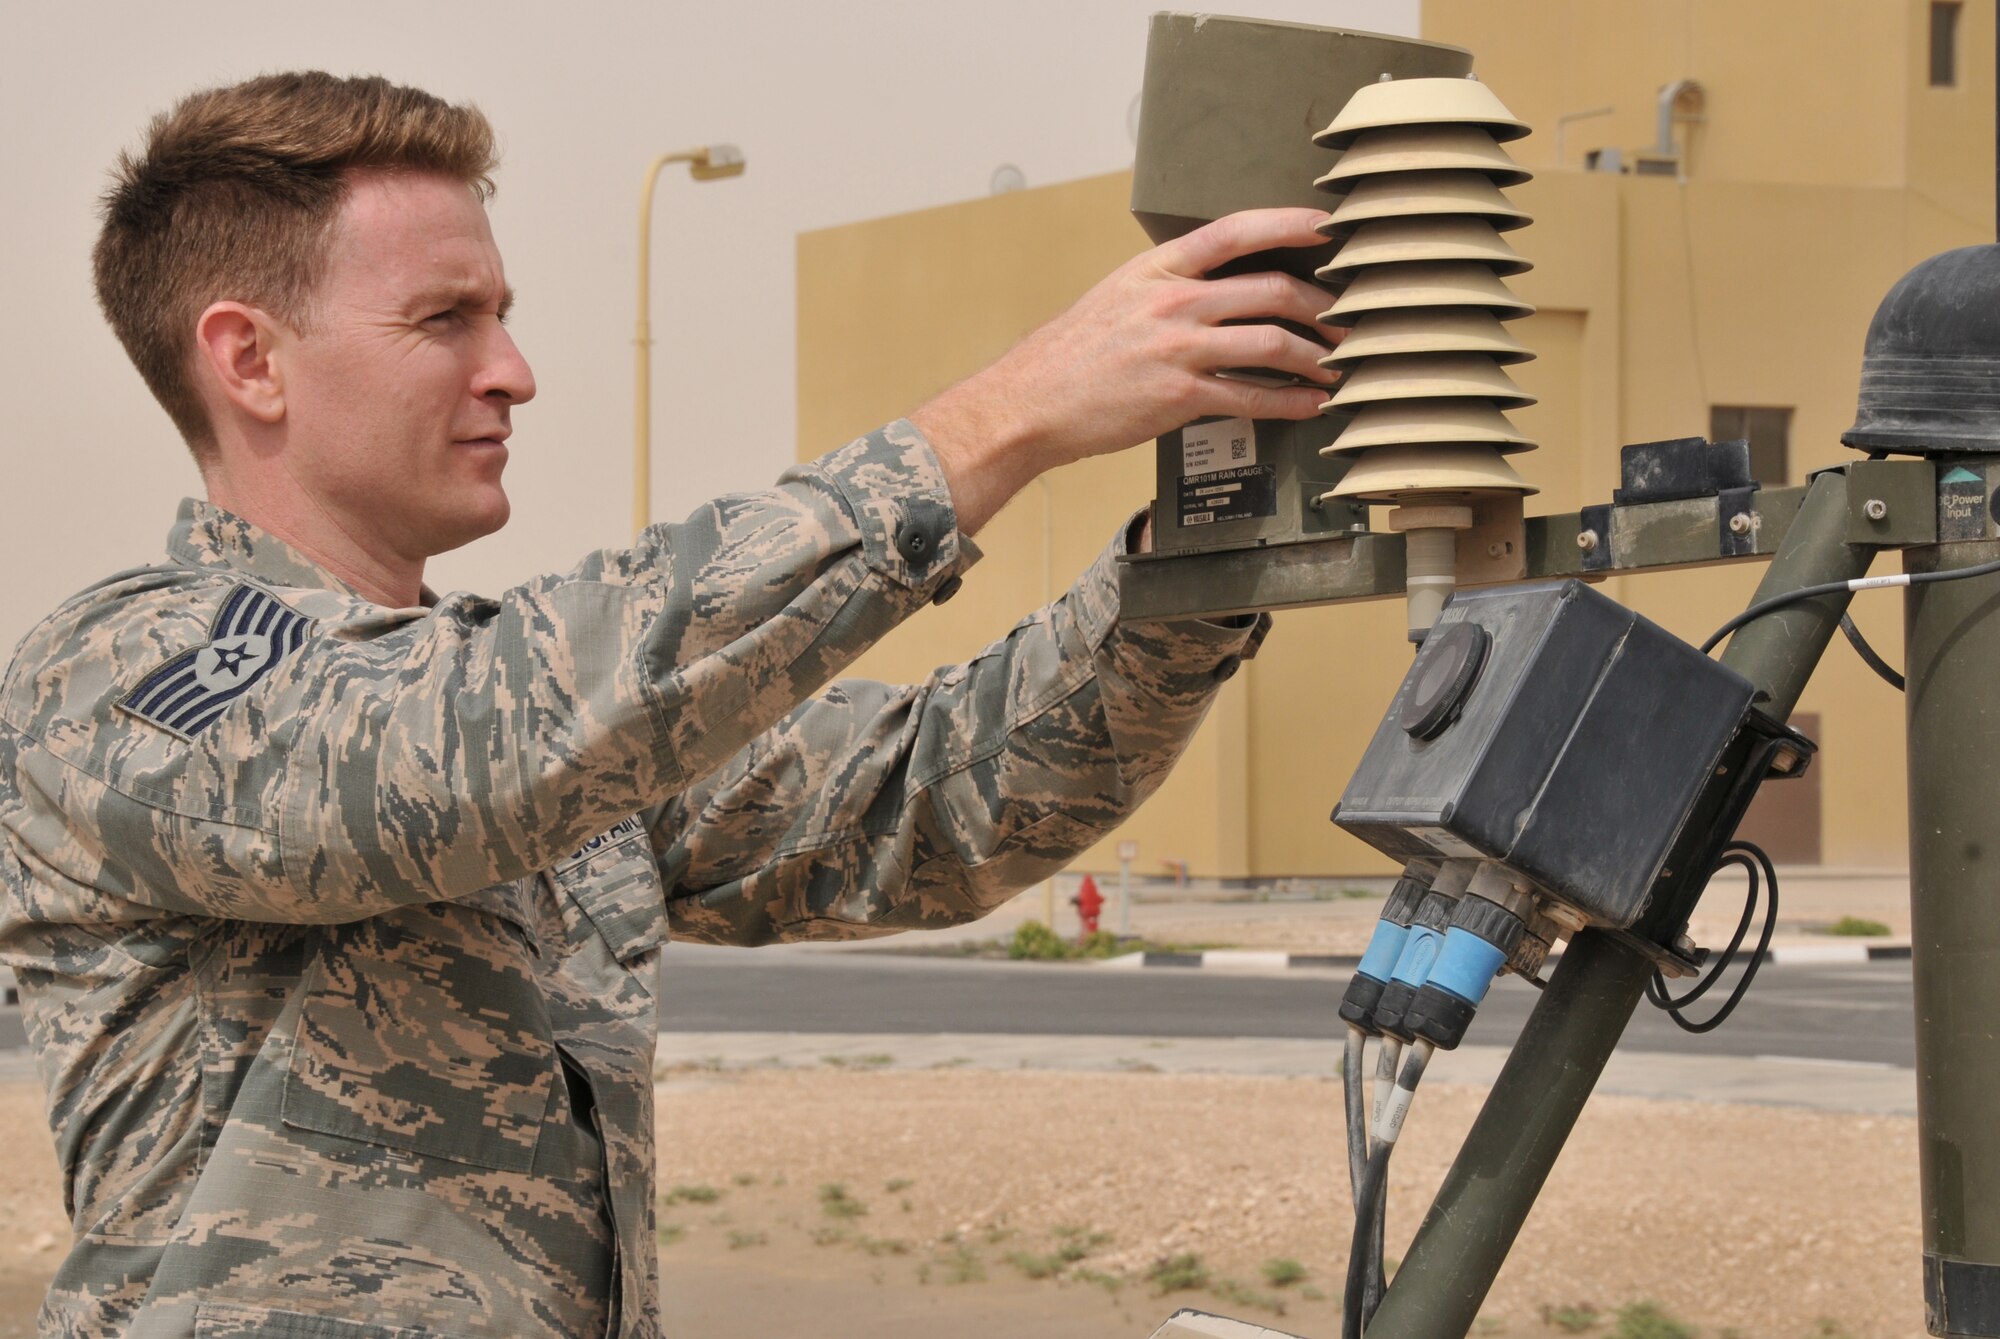 Tech. Sgt. Joshua Rowles, 379th Expeditionary Operations Support Squadron weather forecaster, checks a rain gauge March 17 at Al Udeid Air Base, Qatar. Rowles checks the gauge for bird’s nest which makes the Tactical Meteorological Observing System give false information. Rain gauges measure precipitation over a period of time. (U.S. Air Force photo by Tech. Sgt. Terrica Y. Jones/Released)